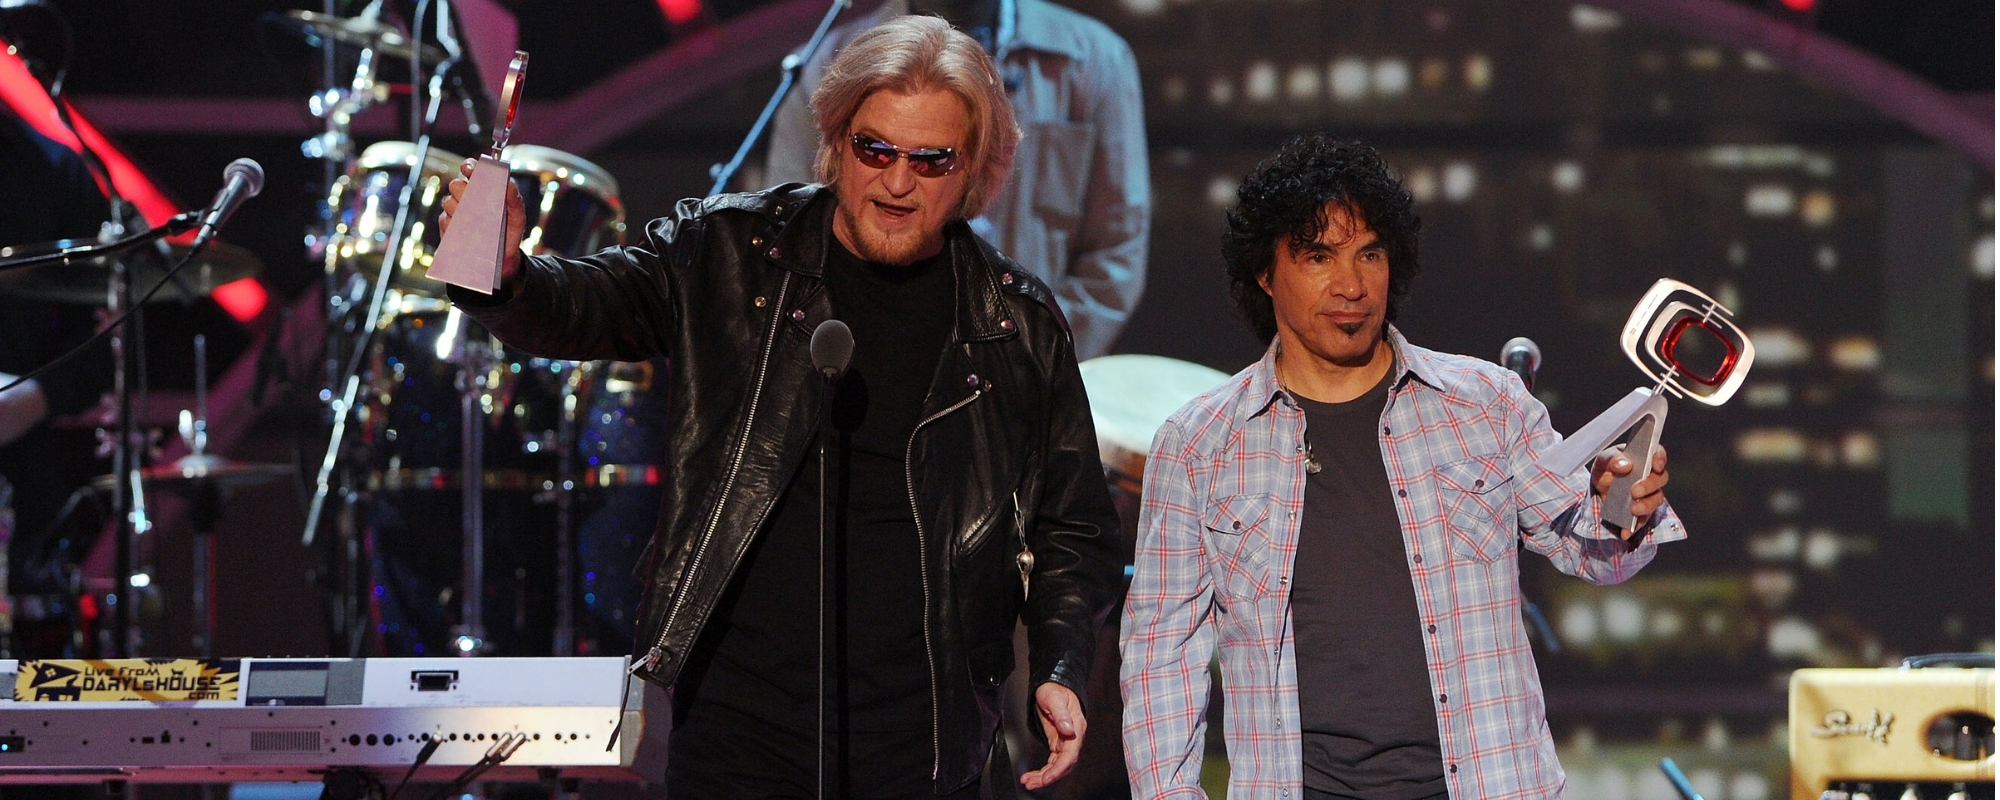 New Details Emerge in Hall & Oates Legal Battle